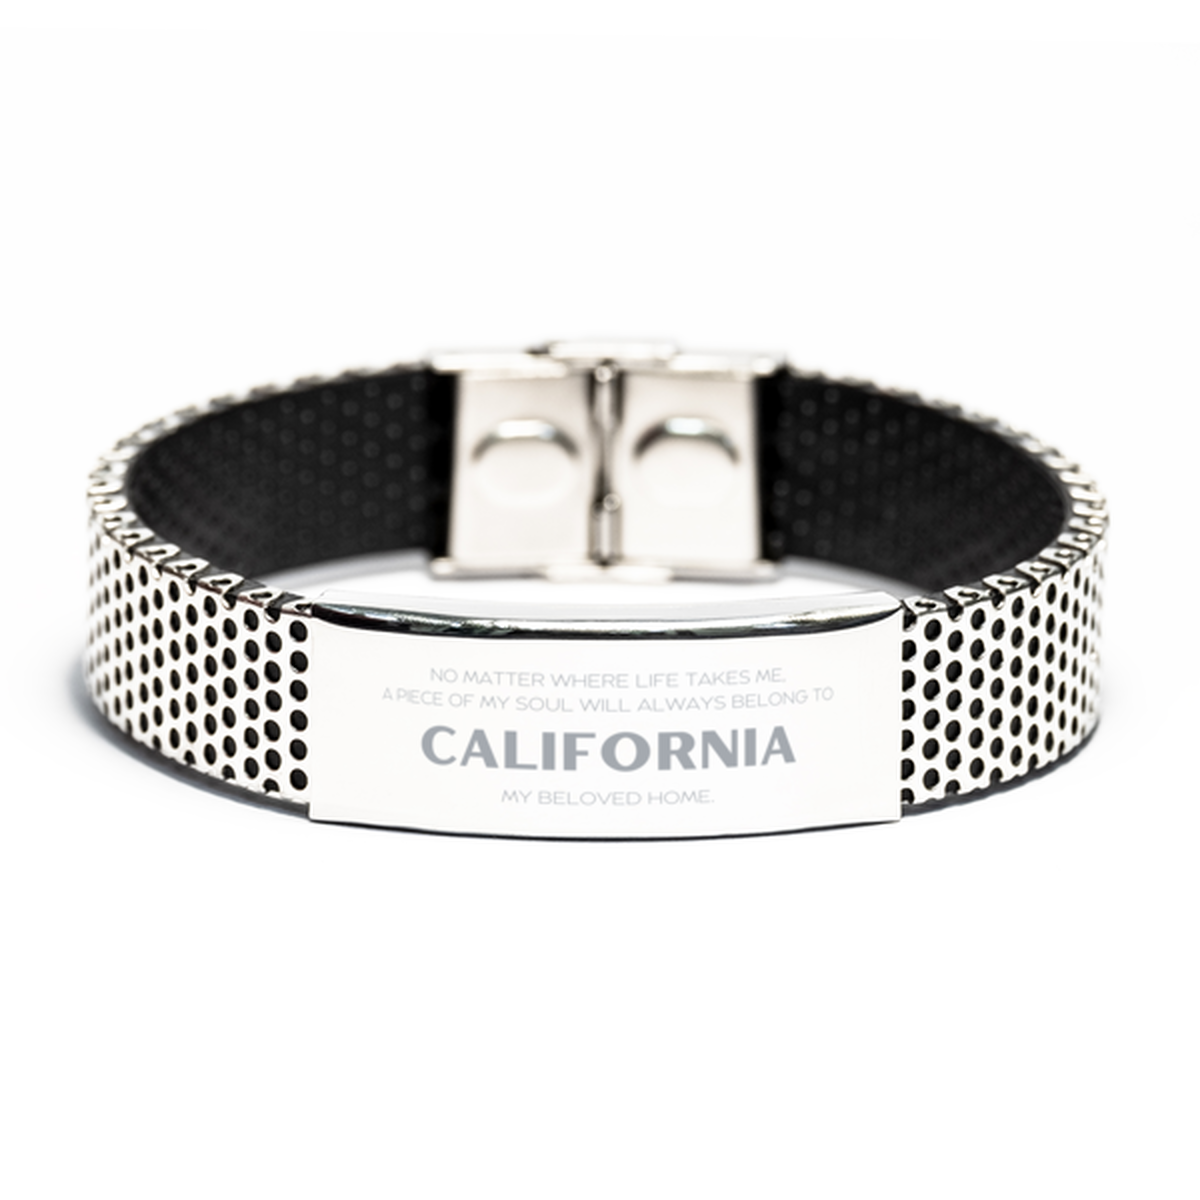 Love California State Gifts, My soul will always belong to California, Proud Stainless Steel Bracelet, Birthday Unique Gifts For California Men, Women, Friends